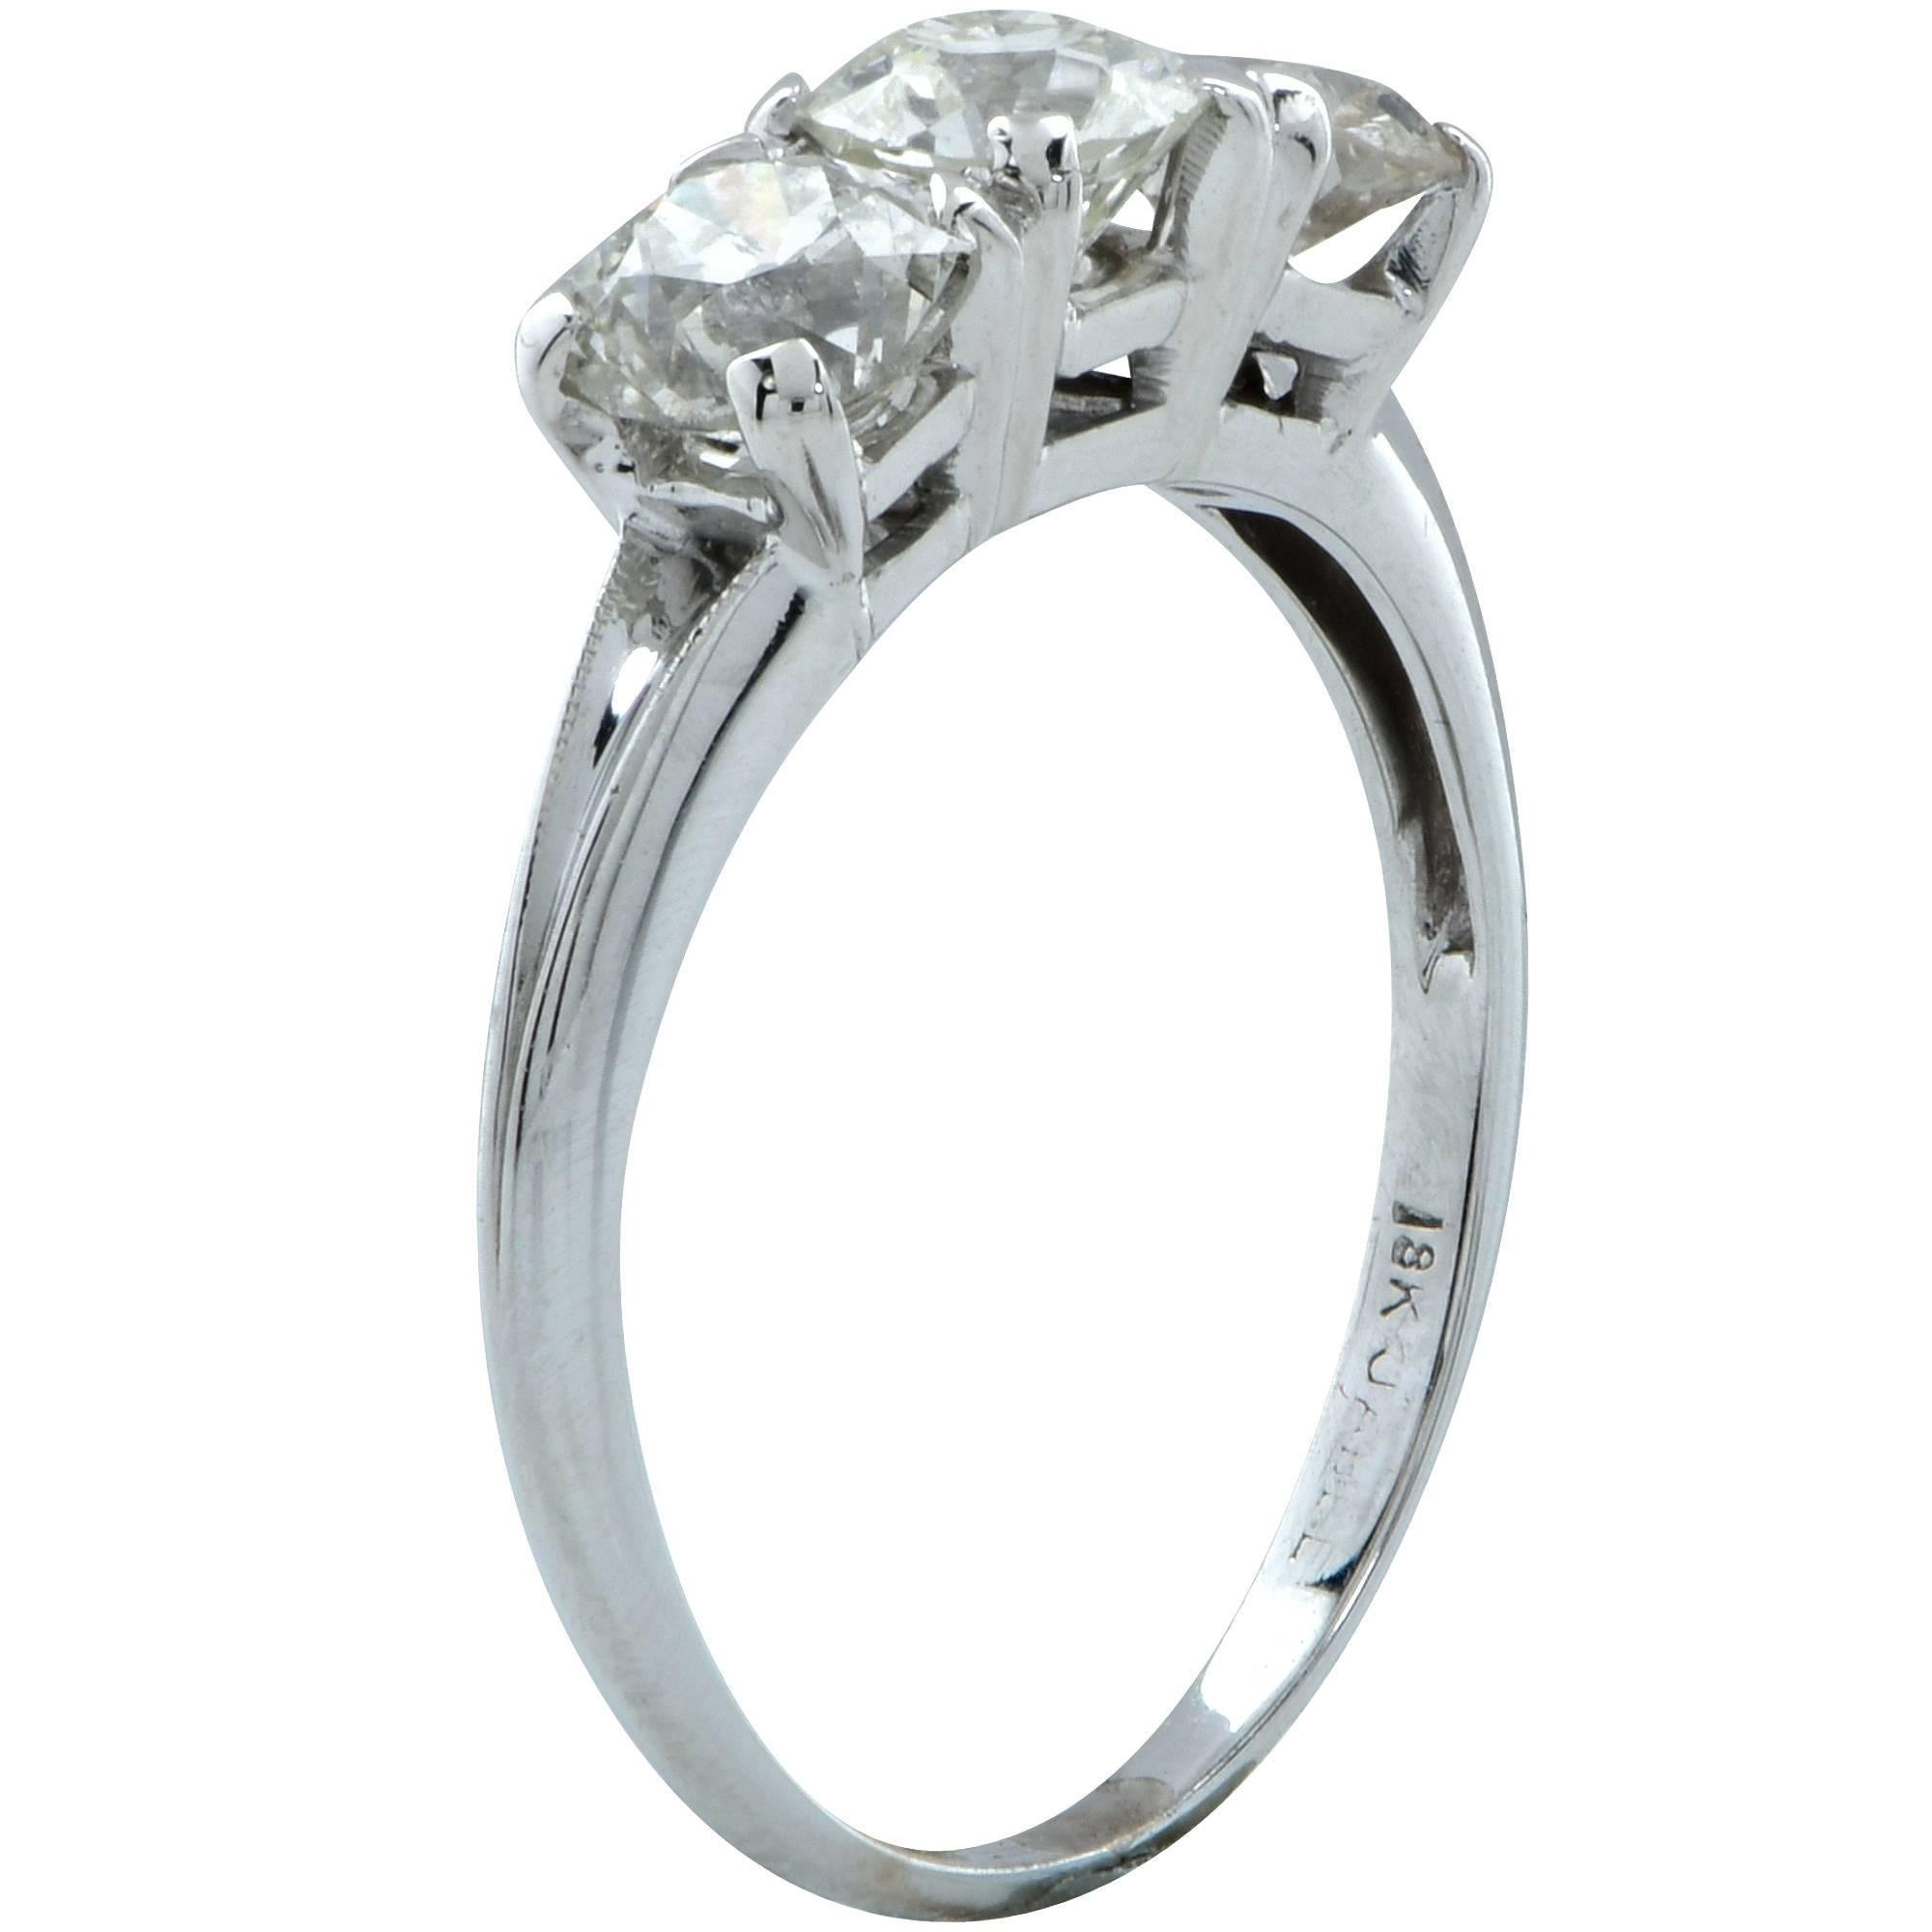 18k white gold Art Deco three stone old European cut diamond ring featuring a .51ct old European cut diamond flanked by two old European cut diamonds weighing approximately one carat total, H-J color VS2- I1 clarity. The face of the ring measures